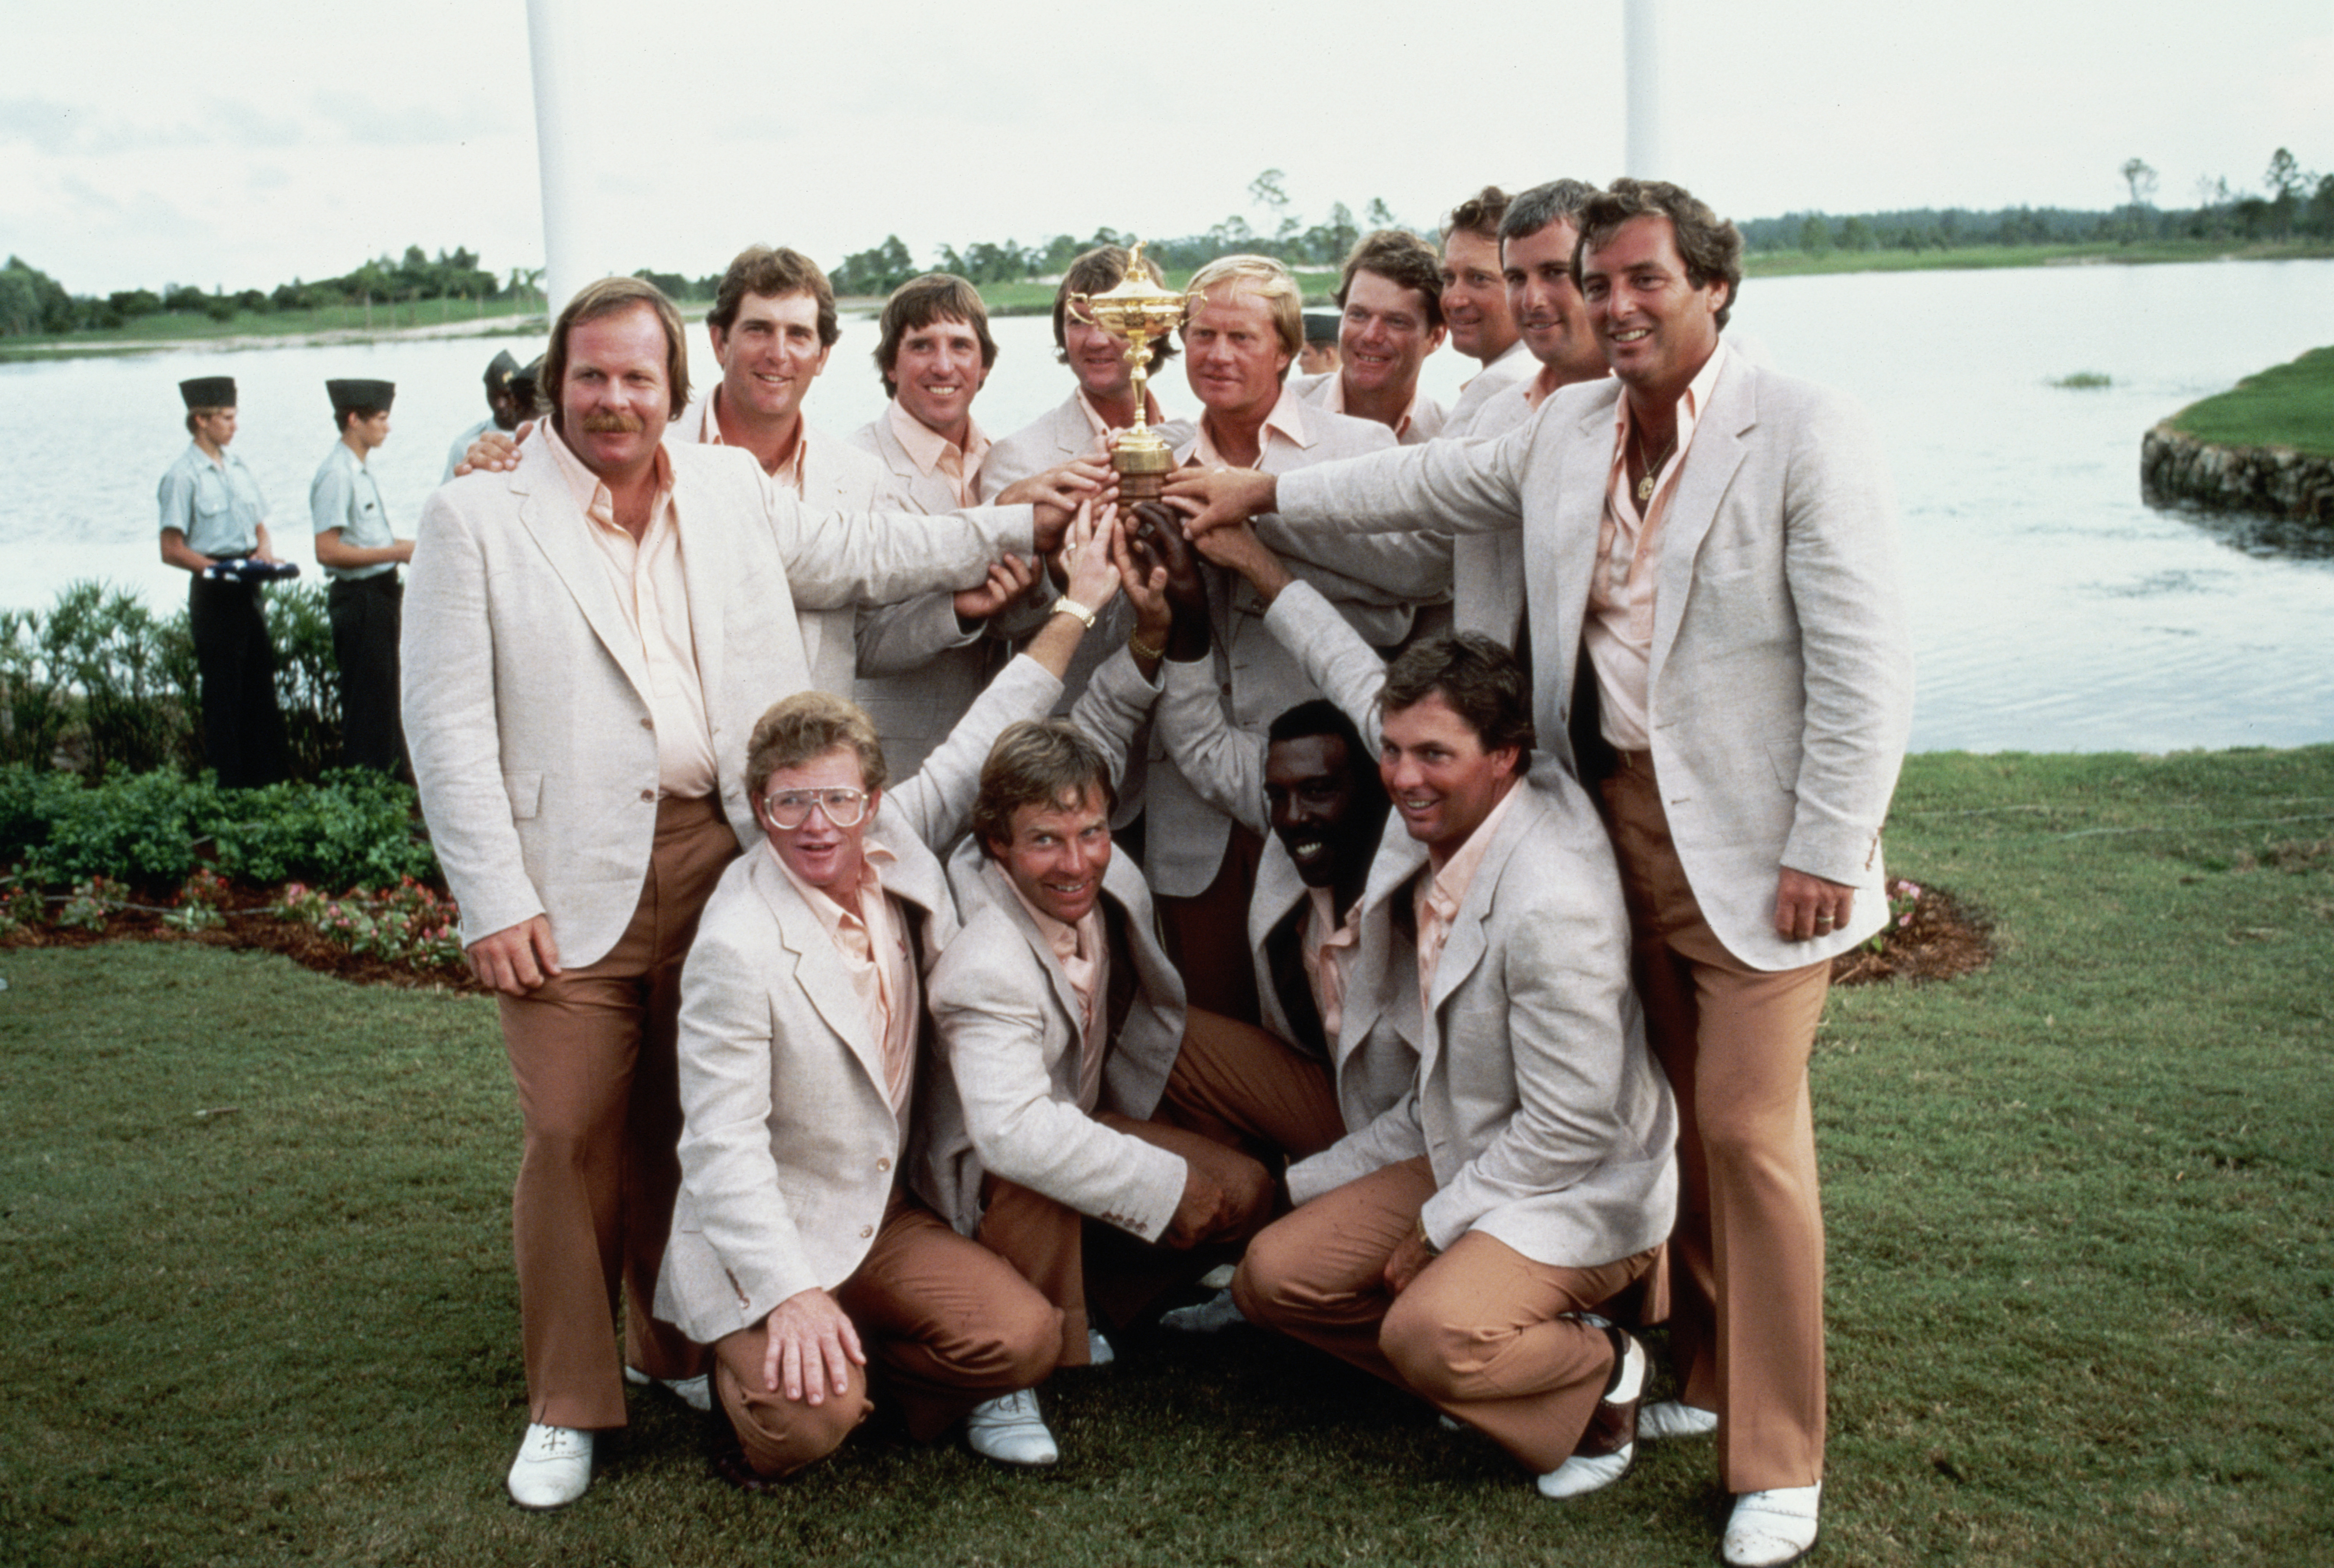 Jack Nicklaus and his team pose with the Ryder cup trophy in 1983 (Photo: Getty Images)